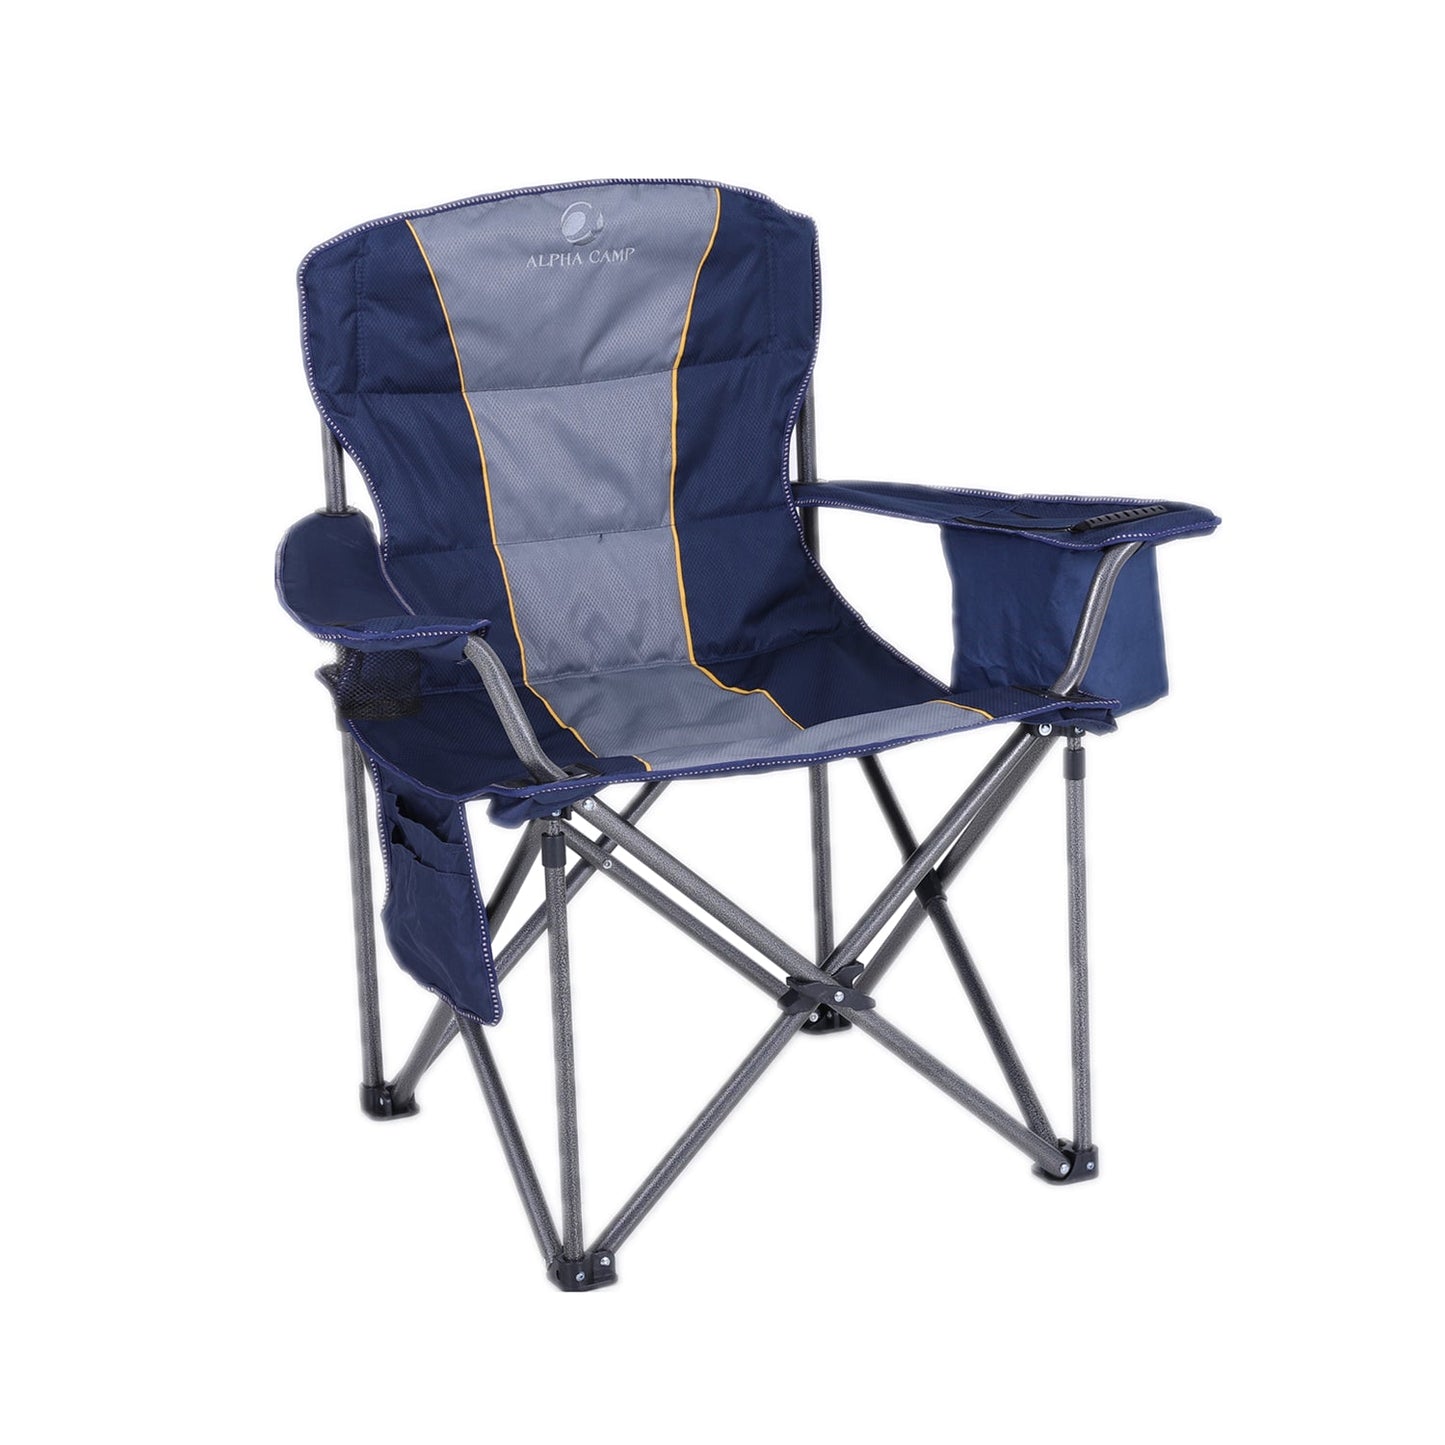 Sophia&William Outdoor Oversized Folding Camping Chair, Blue